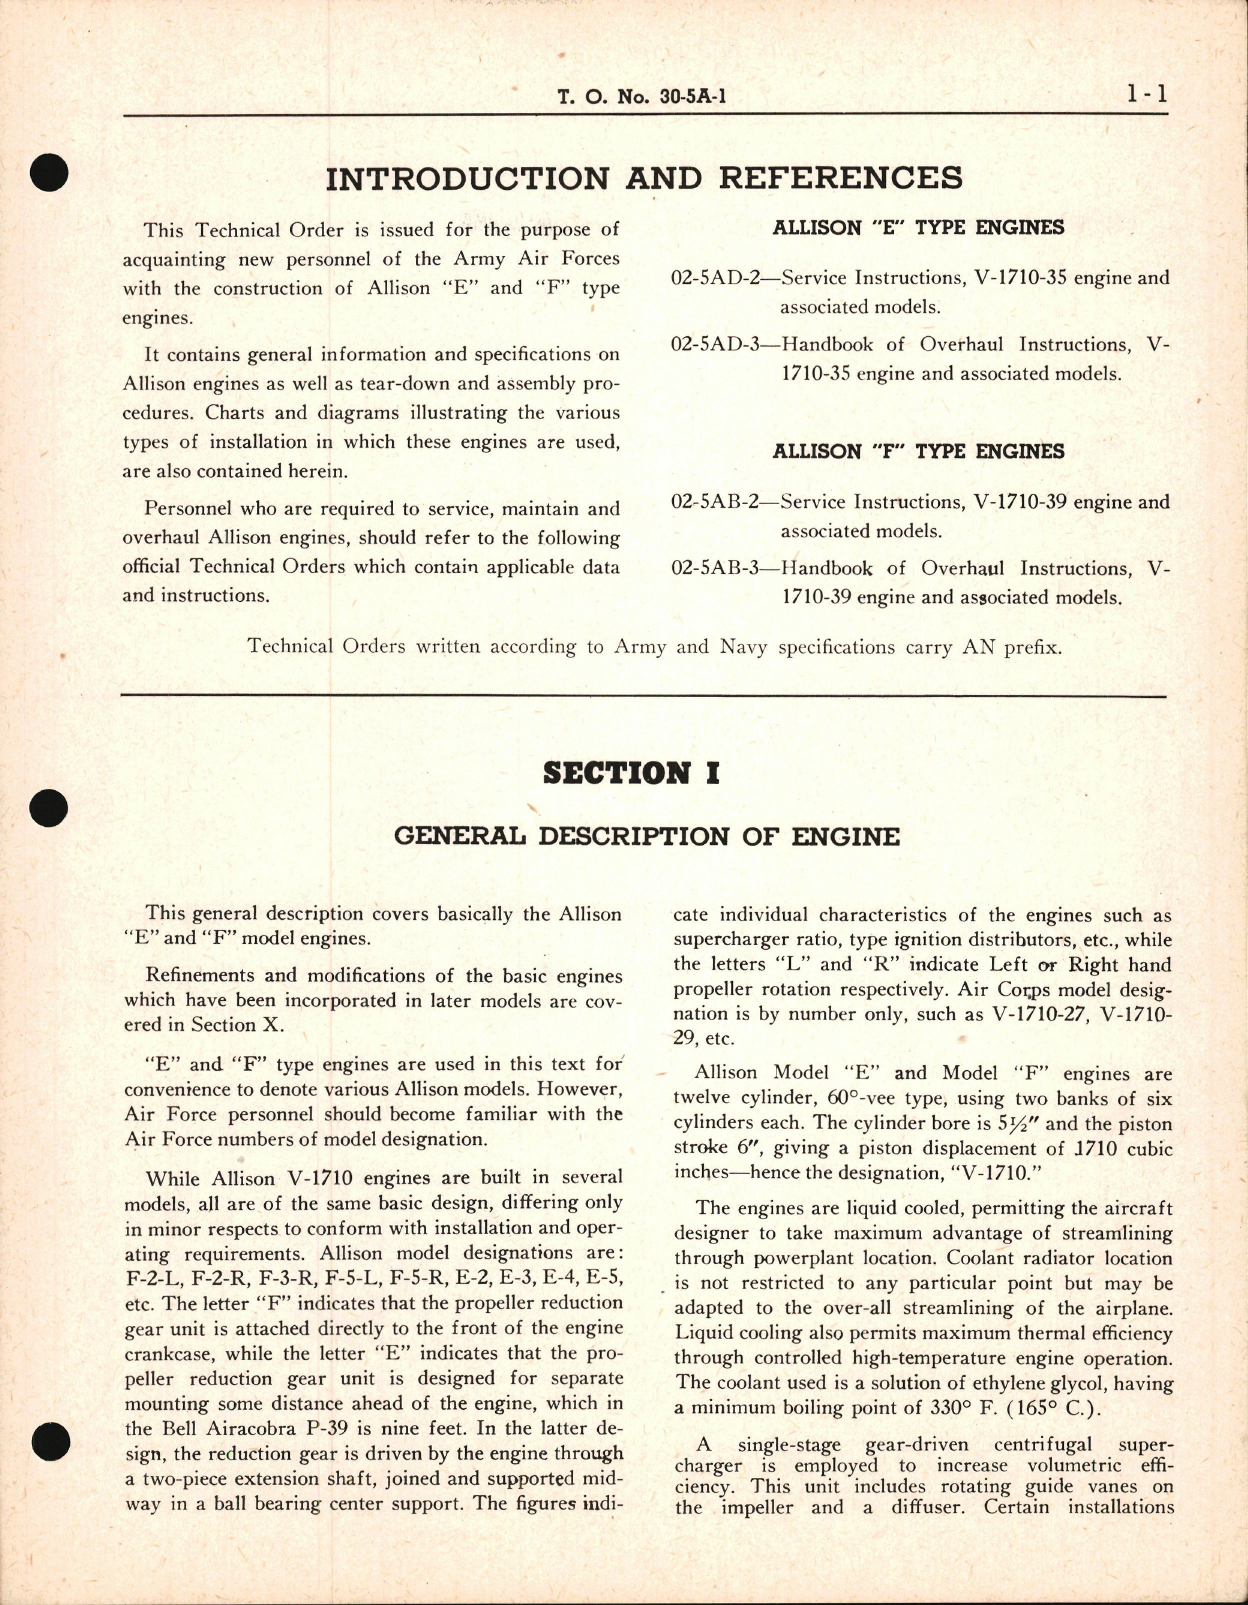 Sample page 7 from AirCorps Library document: Information Guide for Allison V-1710 E and F Engines